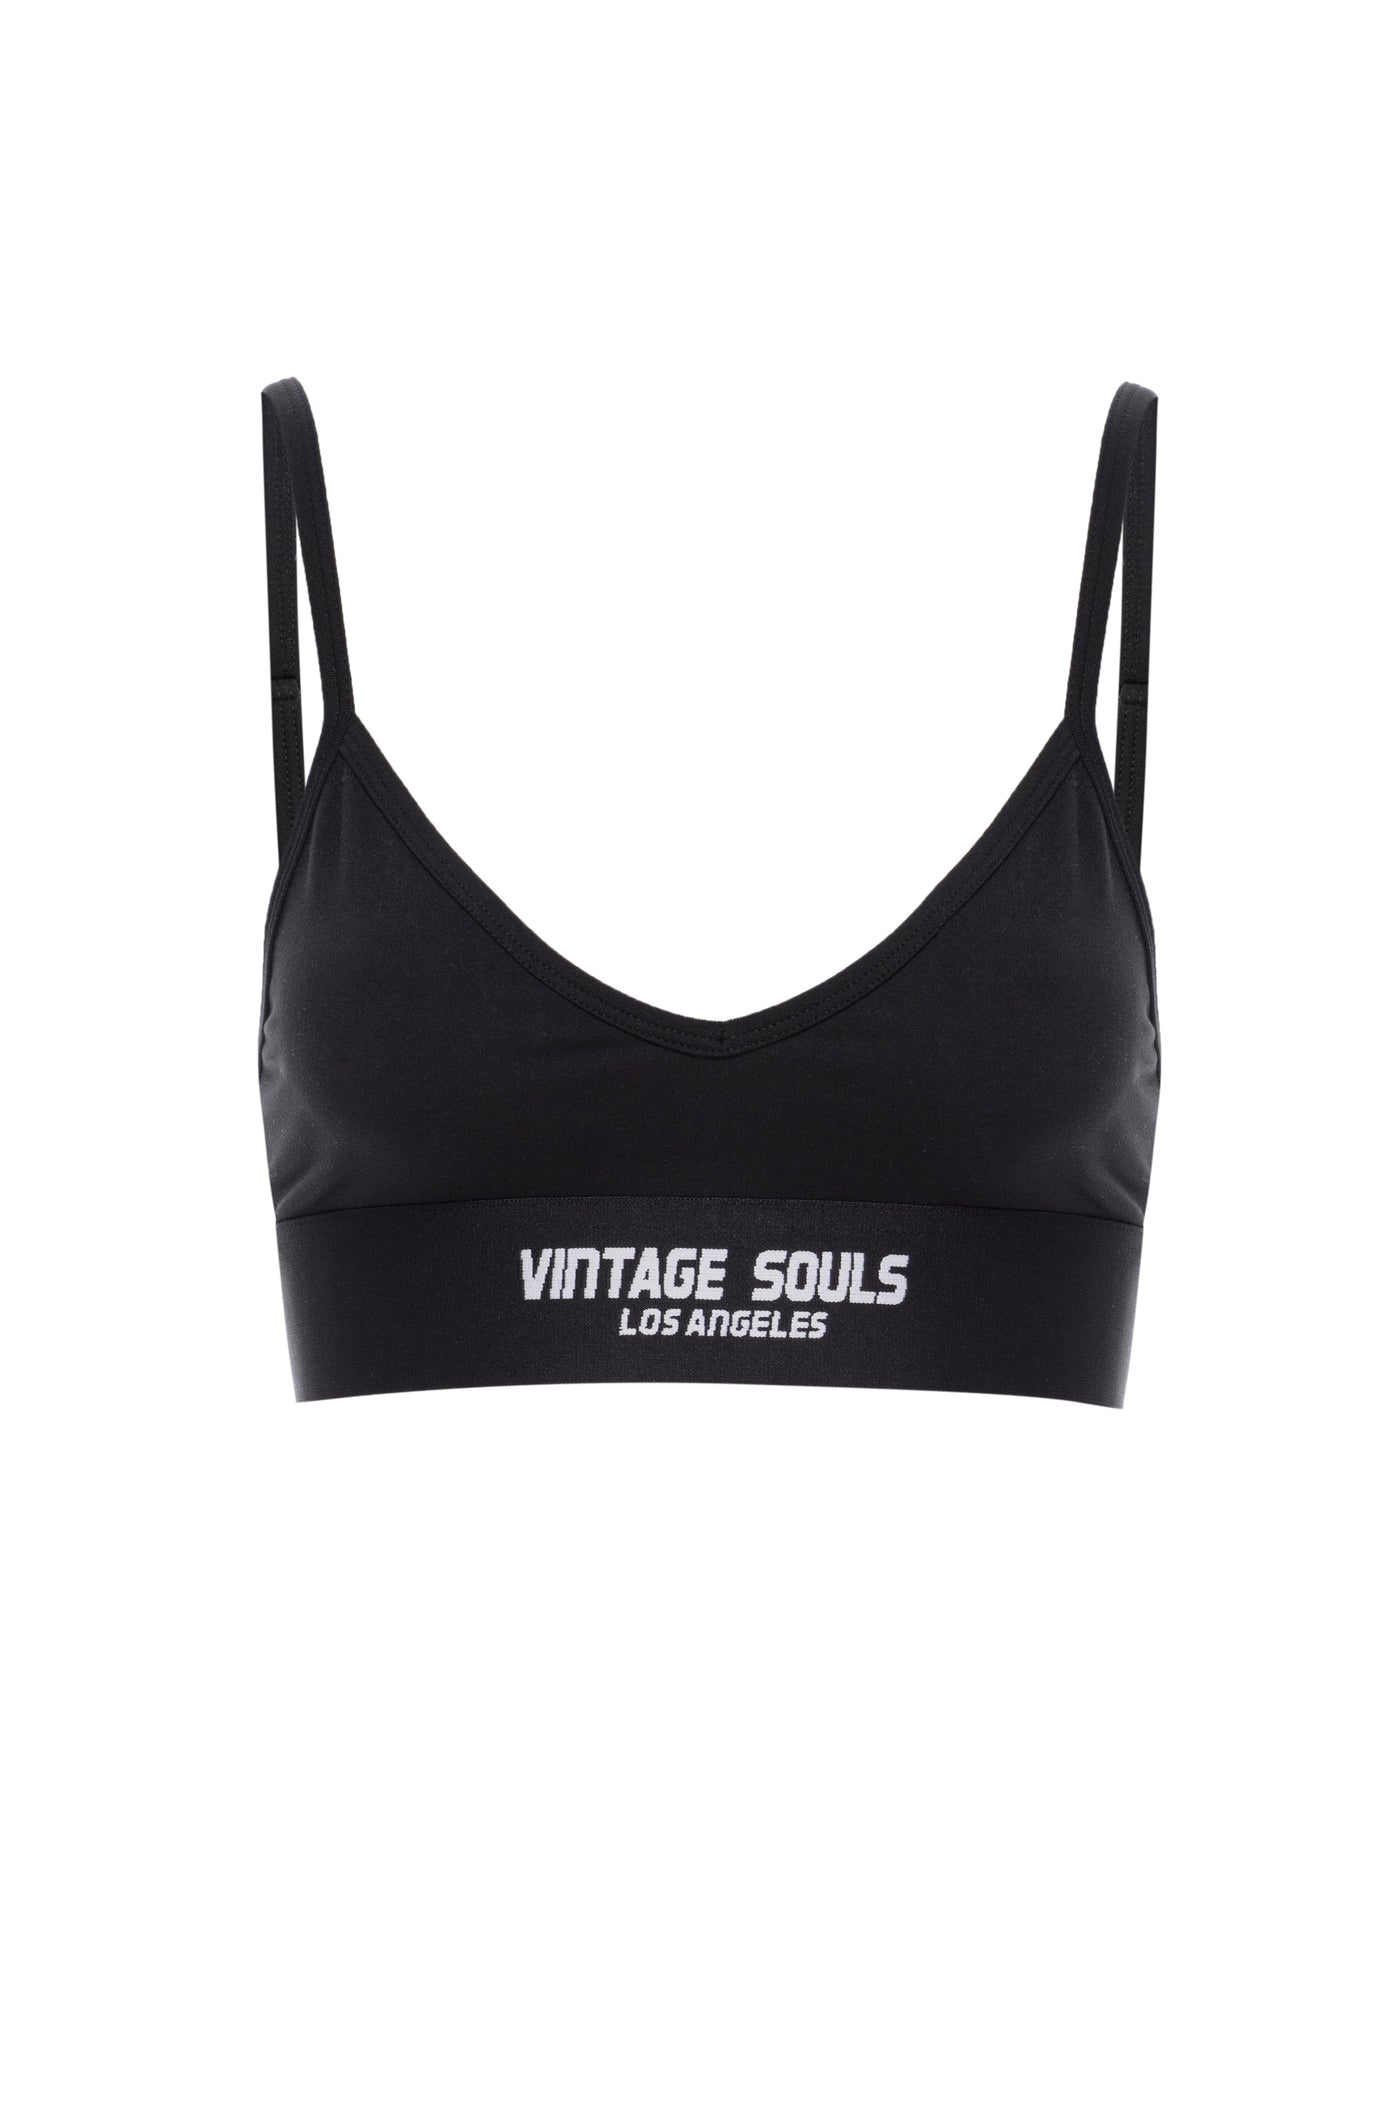 Black Active Bra with embellished logo band, made from high-quality performance fabric, handcrafted in LA